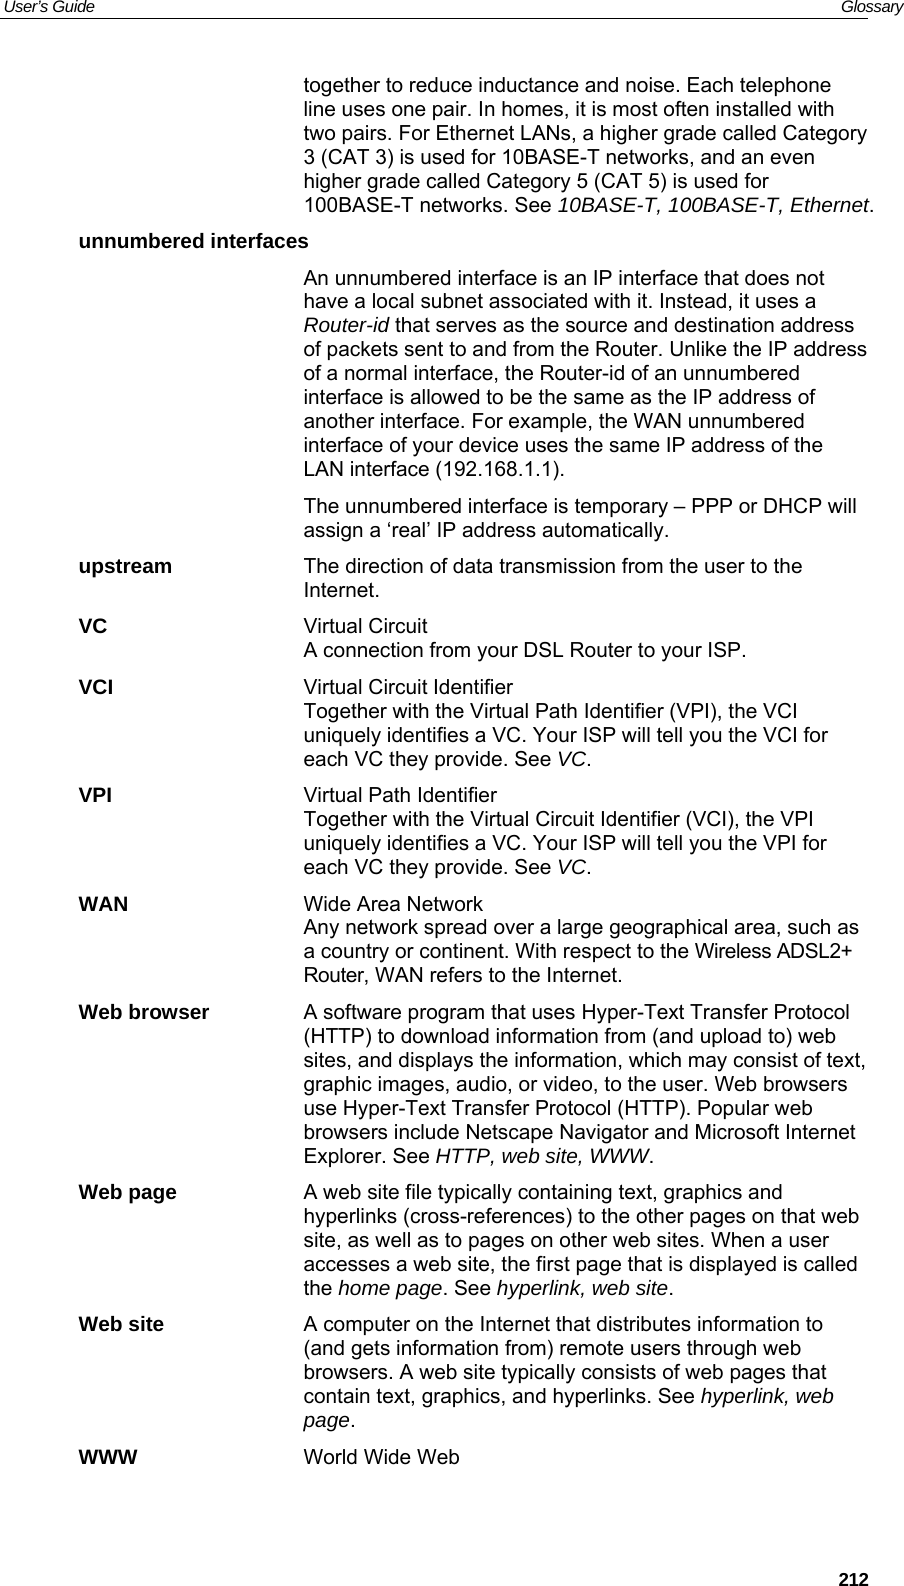 User’s Guide   Glossary together to reduce inductance and noise. Each telephone line uses one pair. In homes, it is most often installed with two pairs. For Ethernet LANs, a higher grade called Category 3 (CAT 3) is used for 10BASE-T networks, and an even higher grade called Category 5 (CAT 5) is used for 100BASE-T networks. See 10BASE-T, 100BASE-T, Ethernet. unnumbered interfaces  An unnumbered interface is an IP interface that does not have a local subnet associated with it. Instead, it uses a Router-id that serves as the source and destination address of packets sent to and from the Router. Unlike the IP address of a normal interface, the Router-id of an unnumbered interface is allowed to be the same as the IP address of another interface. For example, the WAN unnumbered interface of your device uses the same IP address of the LAN interface (192.168.1.1).   The unnumbered interface is temporary – PPP or DHCP will assign a ‘real’ IP address automatically. upstream  The direction of data transmission from the user to the Internet. VC Virtual Circuit A connection from your DSL Router to your ISP. VCI  Virtual Circuit Identifier Together with the Virtual Path Identifier (VPI), the VCI uniquely identifies a VC. Your ISP will tell you the VCI for each VC they provide. See VC. VPI  Virtual Path Identifier Together with the Virtual Circuit Identifier (VCI), the VPI uniquely identifies a VC. Your ISP will tell you the VPI for each VC they provide. See VC. WAN  Wide Area Network Any network spread over a large geographical area, such as a country or continent. With respect to the Wireless ADSL2+ Router, WAN refers to the Internet. Web browser  A software program that uses Hyper-Text Transfer Protocol (HTTP) to download information from (and upload to) web sites, and displays the information, which may consist of text, graphic images, audio, or video, to the user. Web browsers use Hyper-Text Transfer Protocol (HTTP). Popular web browsers include Netscape Navigator and Microsoft Internet Explorer. See HTTP, web site, WWW. Web page  A web site file typically containing text, graphics and hyperlinks (cross-references) to the other pages on that web site, as well as to pages on other web sites. When a user accesses a web site, the first page that is displayed is called the home page. See hyperlink, web site. Web site  A computer on the Internet that distributes information to (and gets information from) remote users through web browsers. A web site typically consists of web pages that contain text, graphics, and hyperlinks. See hyperlink, web page. WWW  World Wide Web  212